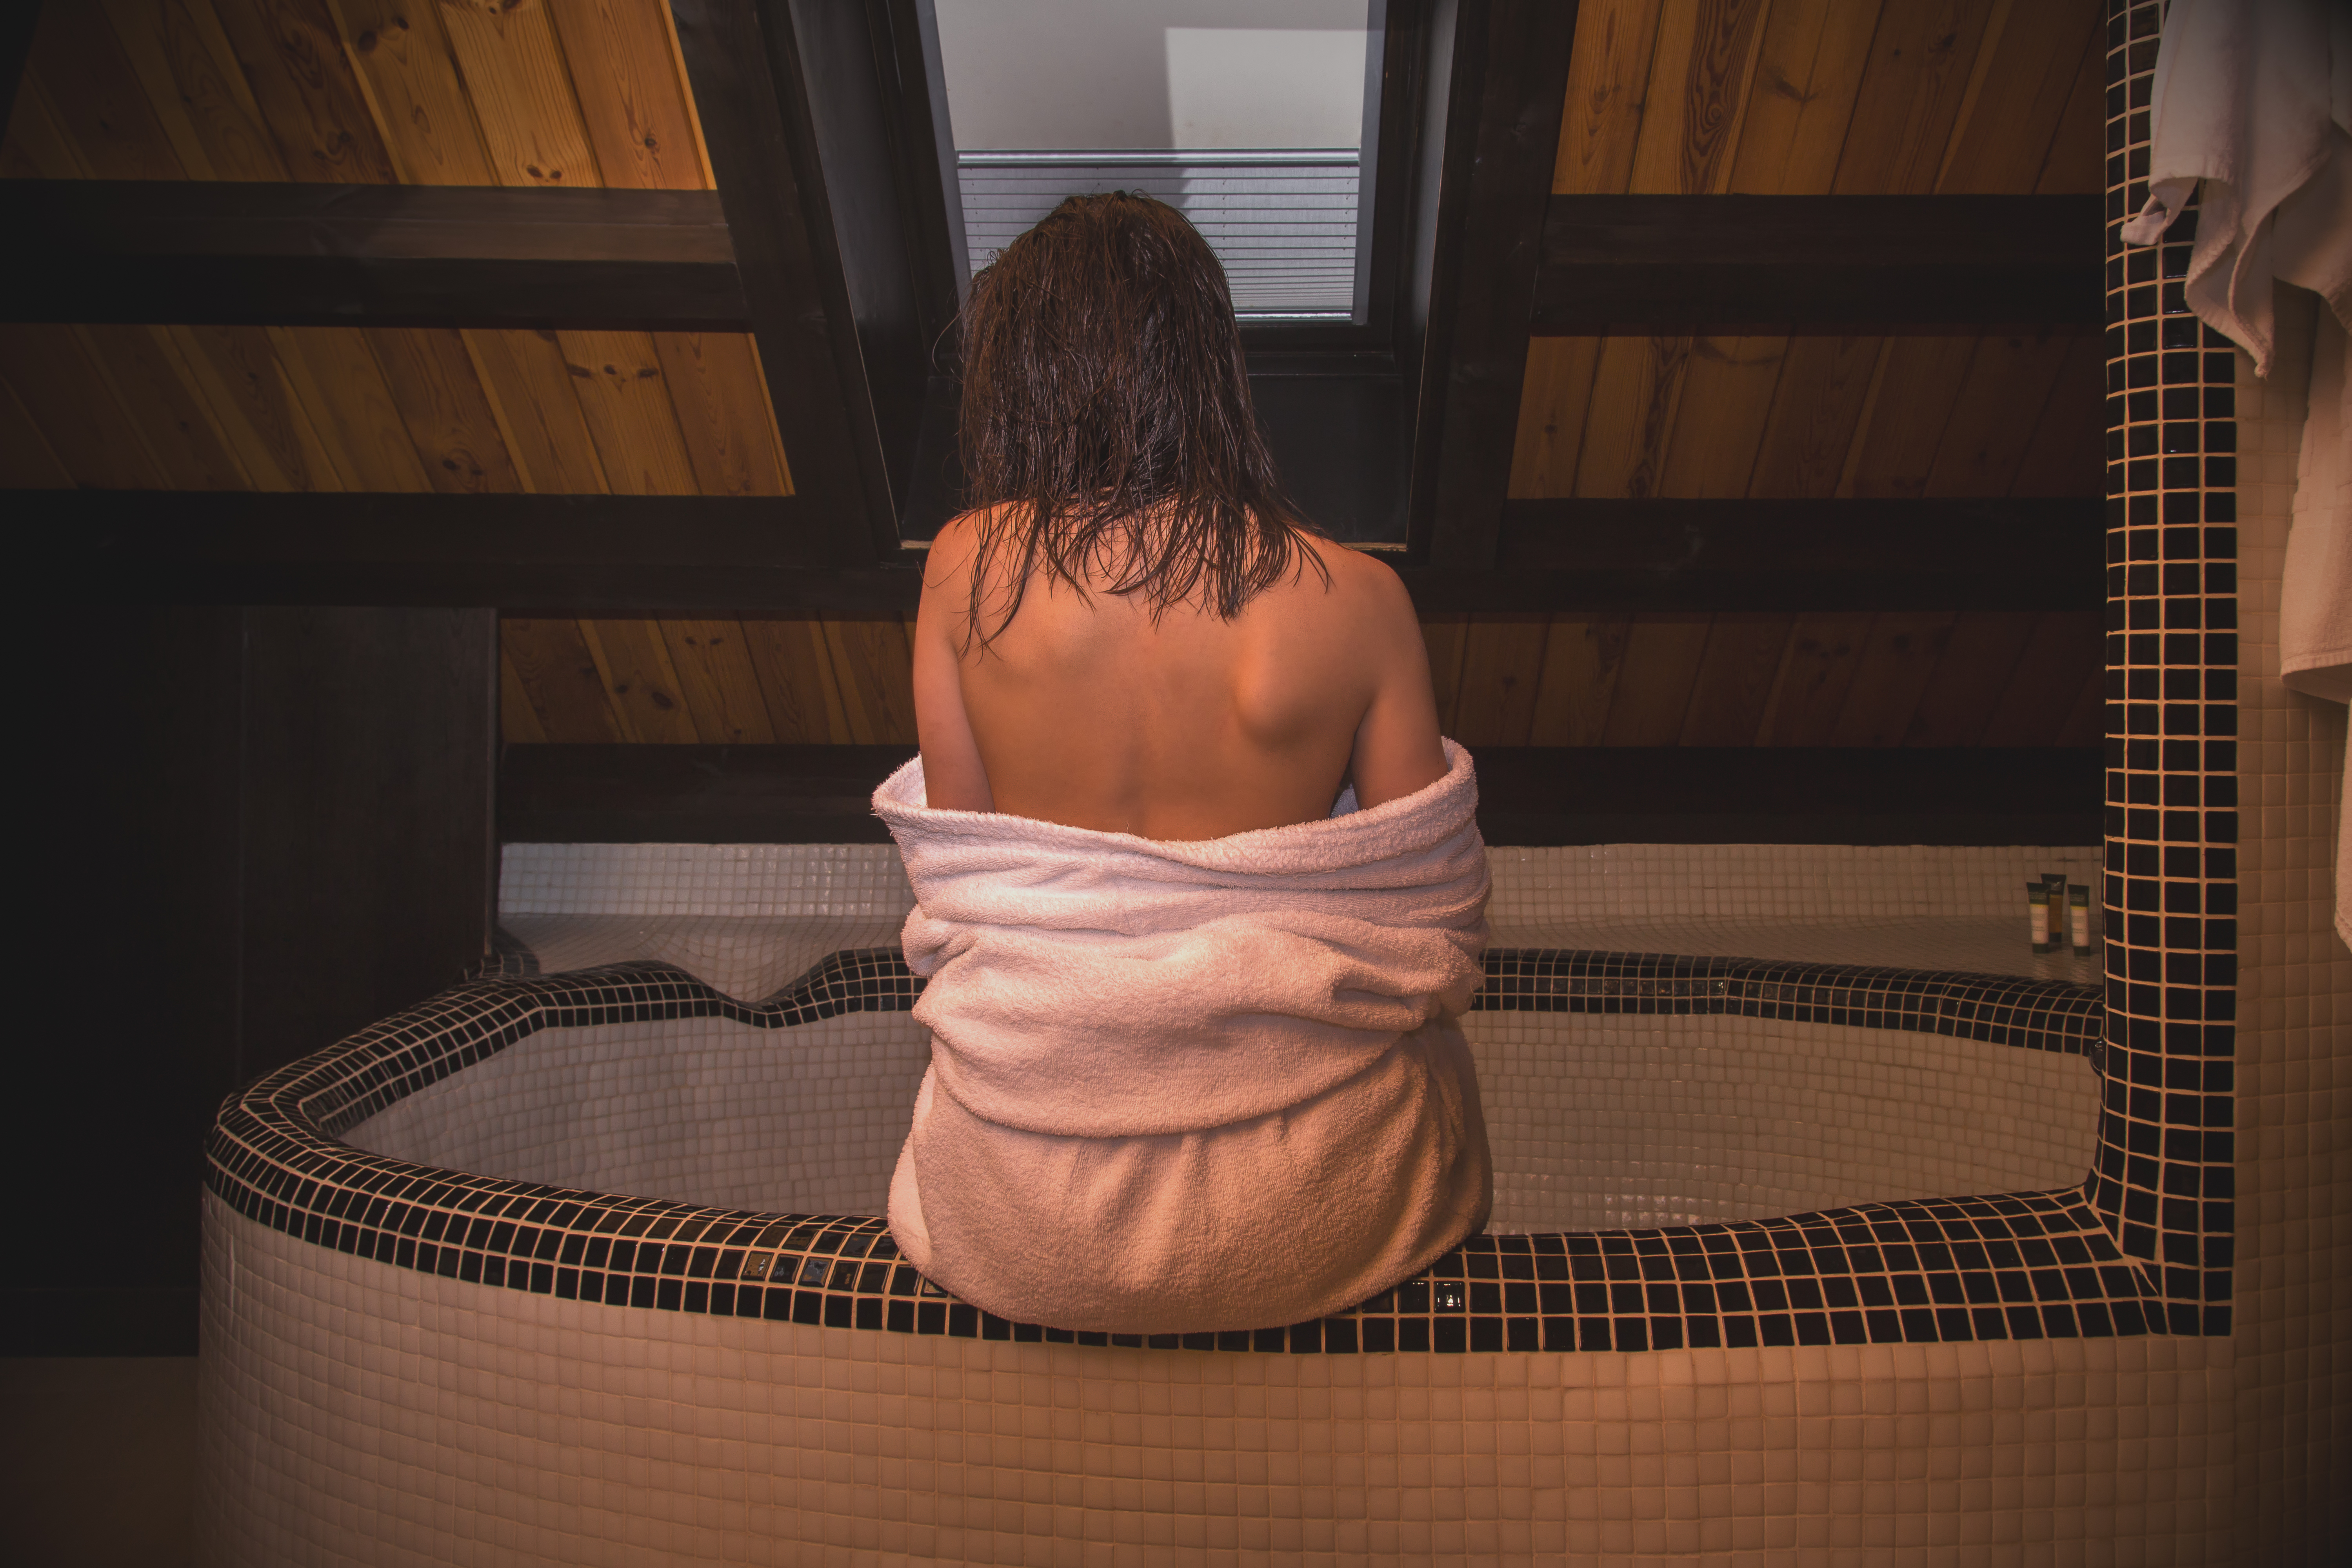 Girl with a bare back is sitting in the bathroom. | Source: Shutterstock